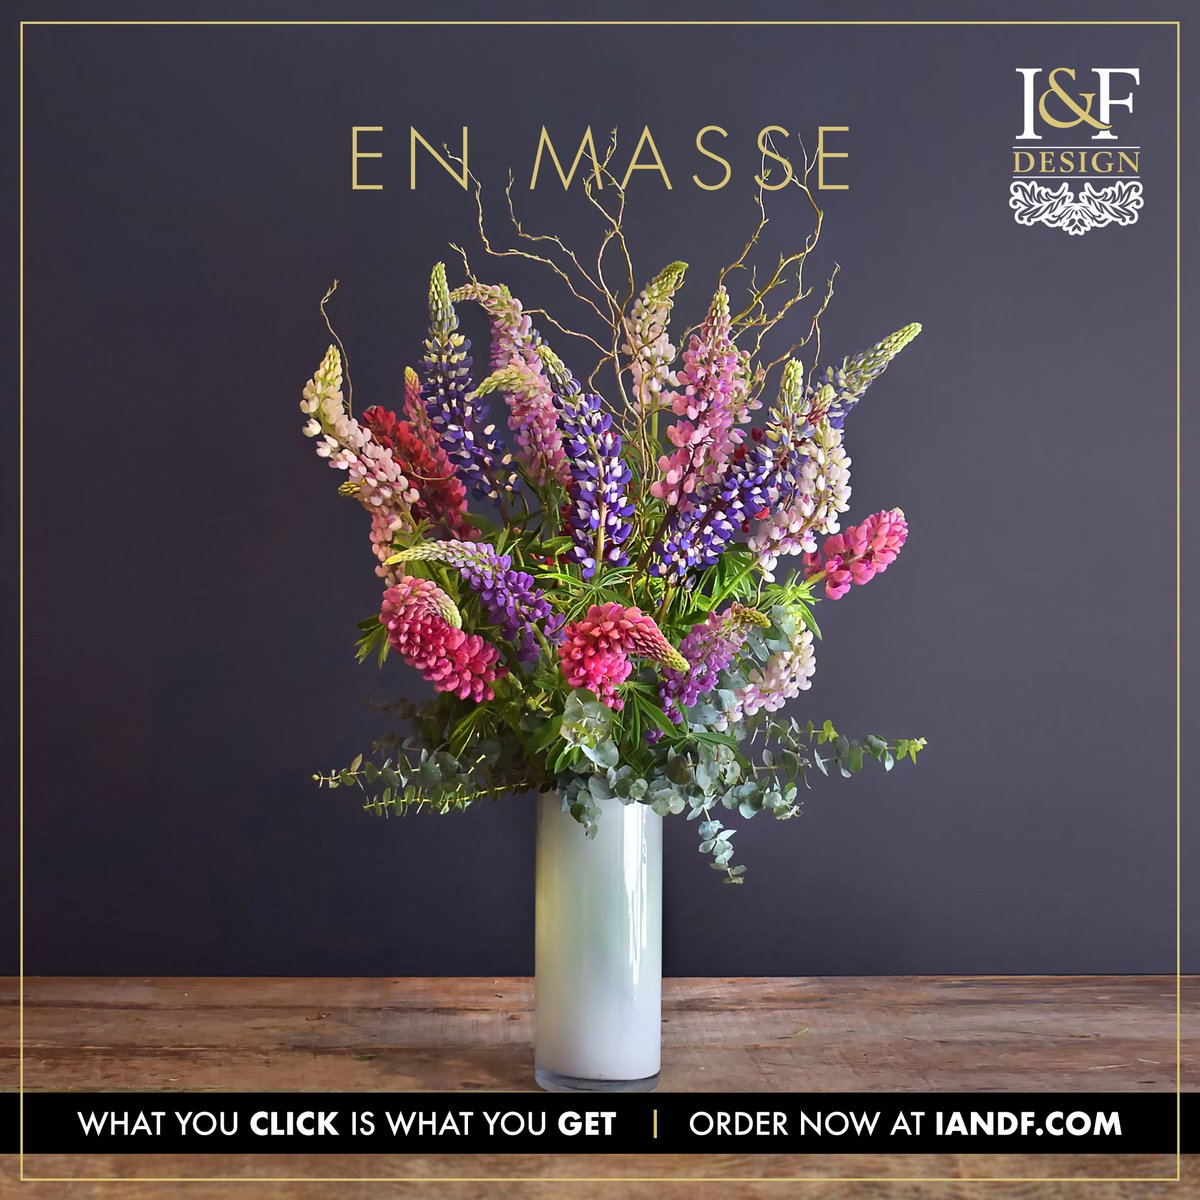 Lupins Skyline—En Masse

1 Exclusive Arrangement Ready For Delivery:
iandf.com/product/lupins…

#iandfdesign #enmasse #flowerdelivery #yqg #florist #springflowers #lupins